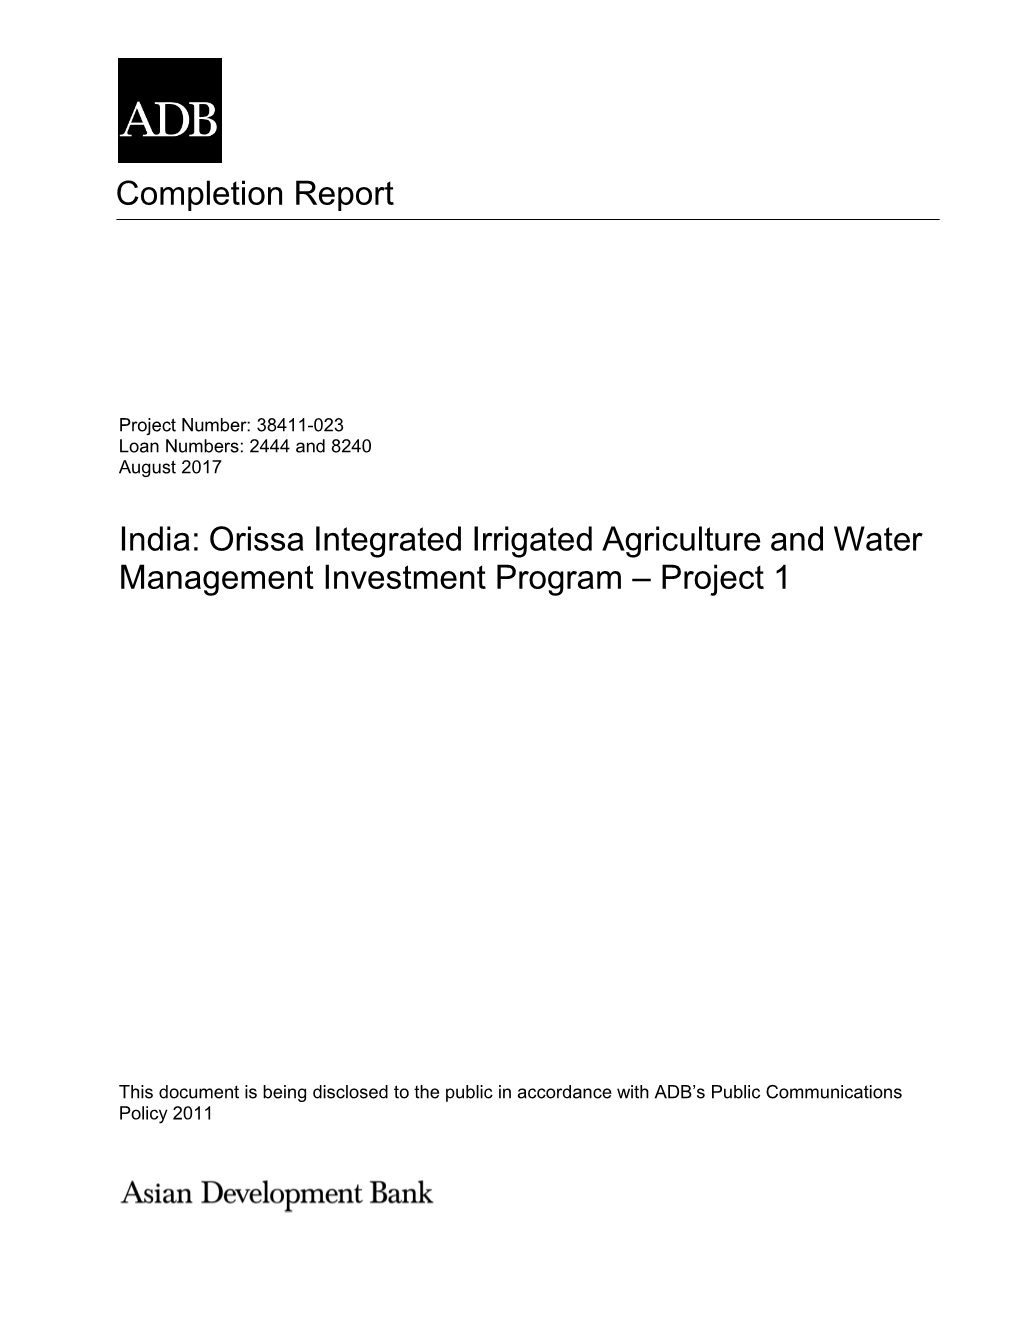 Orissa Integrated Irrigated Agriculture and Water Management Investment Program – Project 1